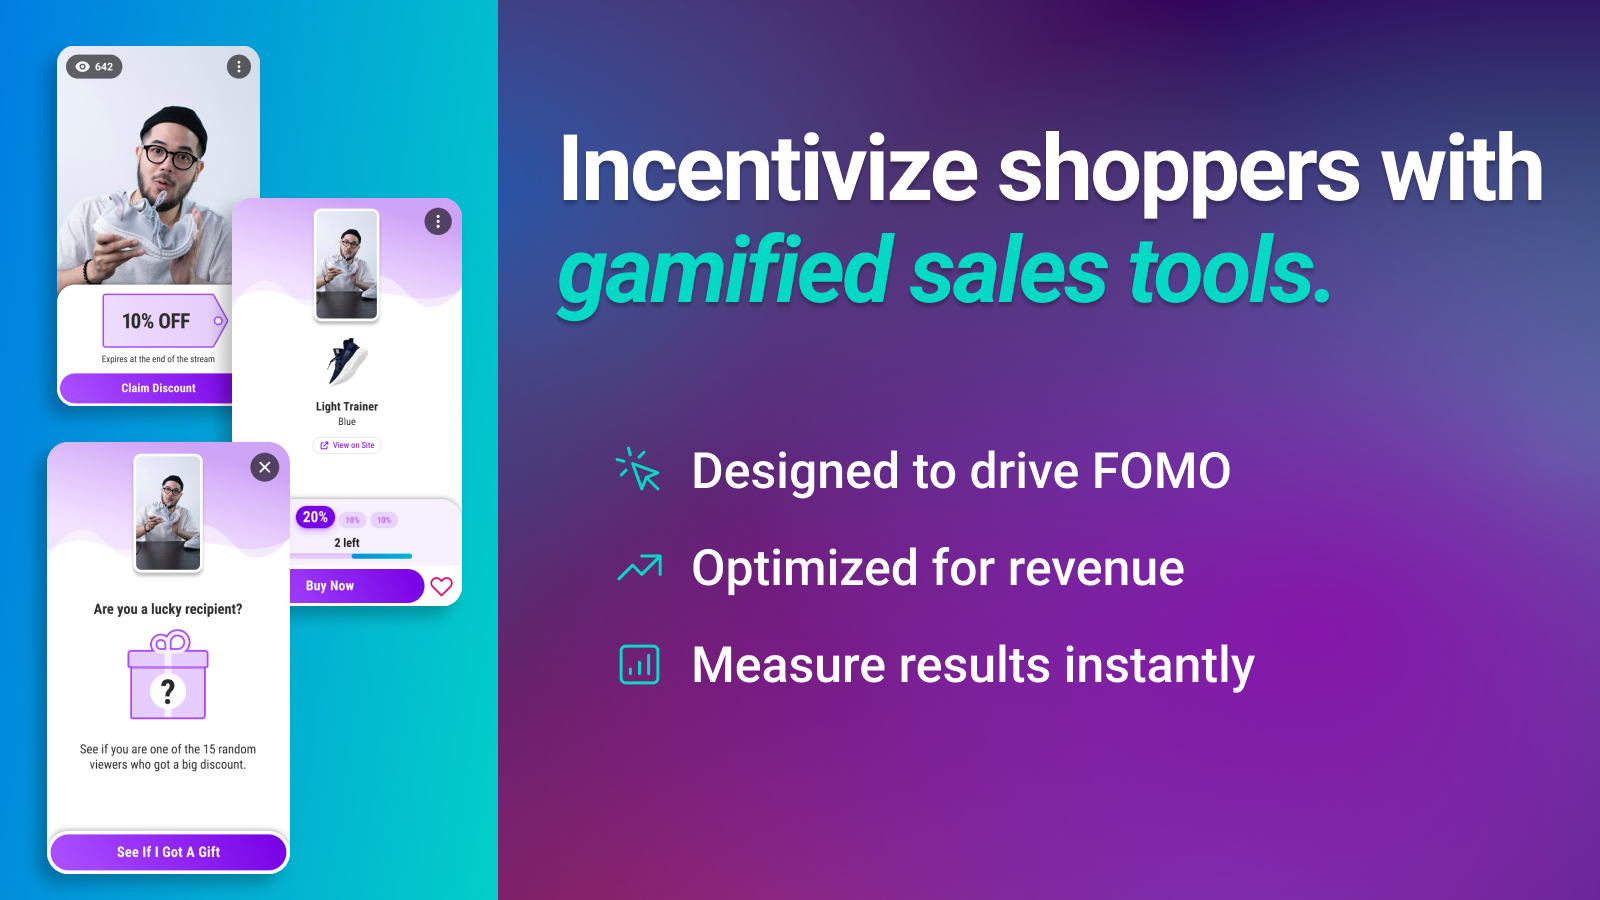 Incentivize shoppers with gamified sales tools.